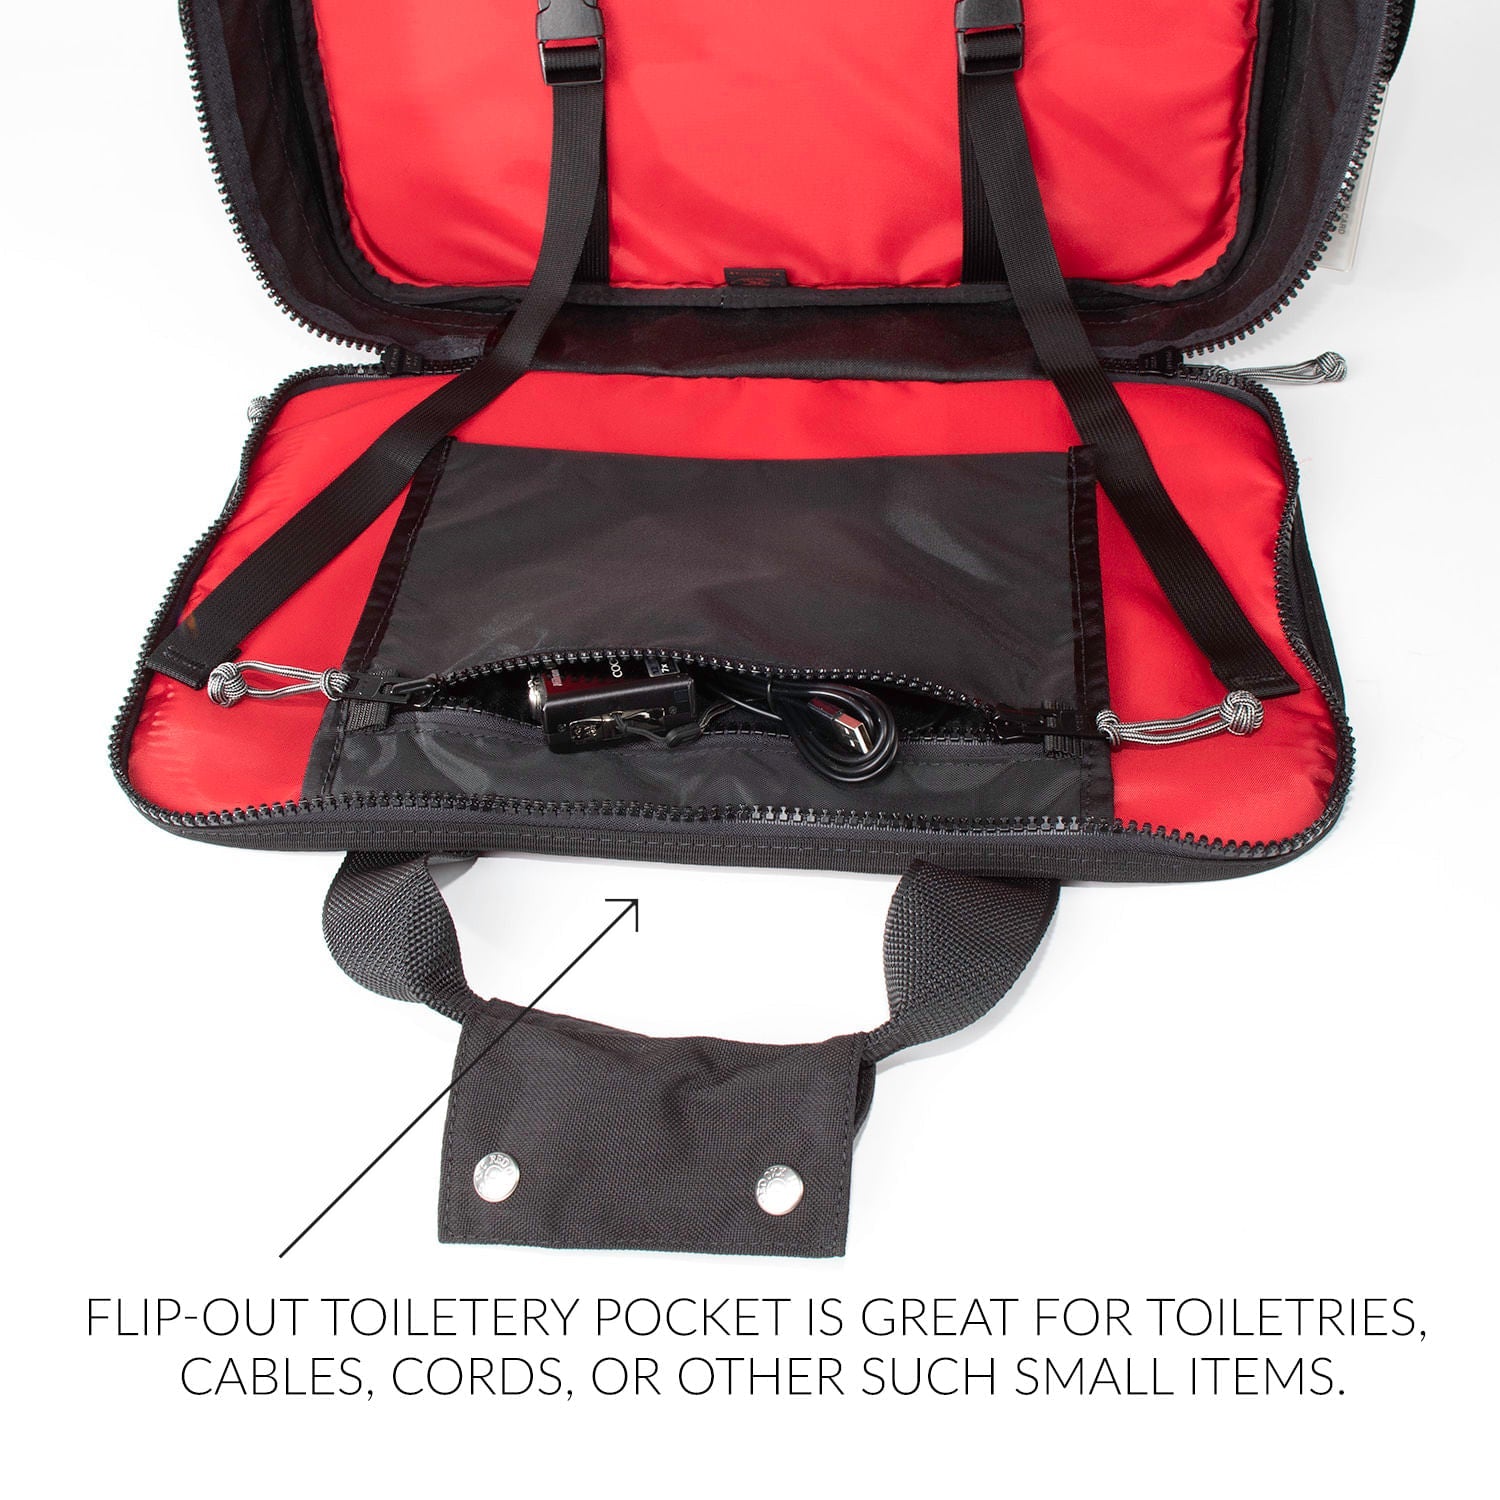 Flip out toiletry pocket is great for toiletries ,cables, cords or other such small items. 